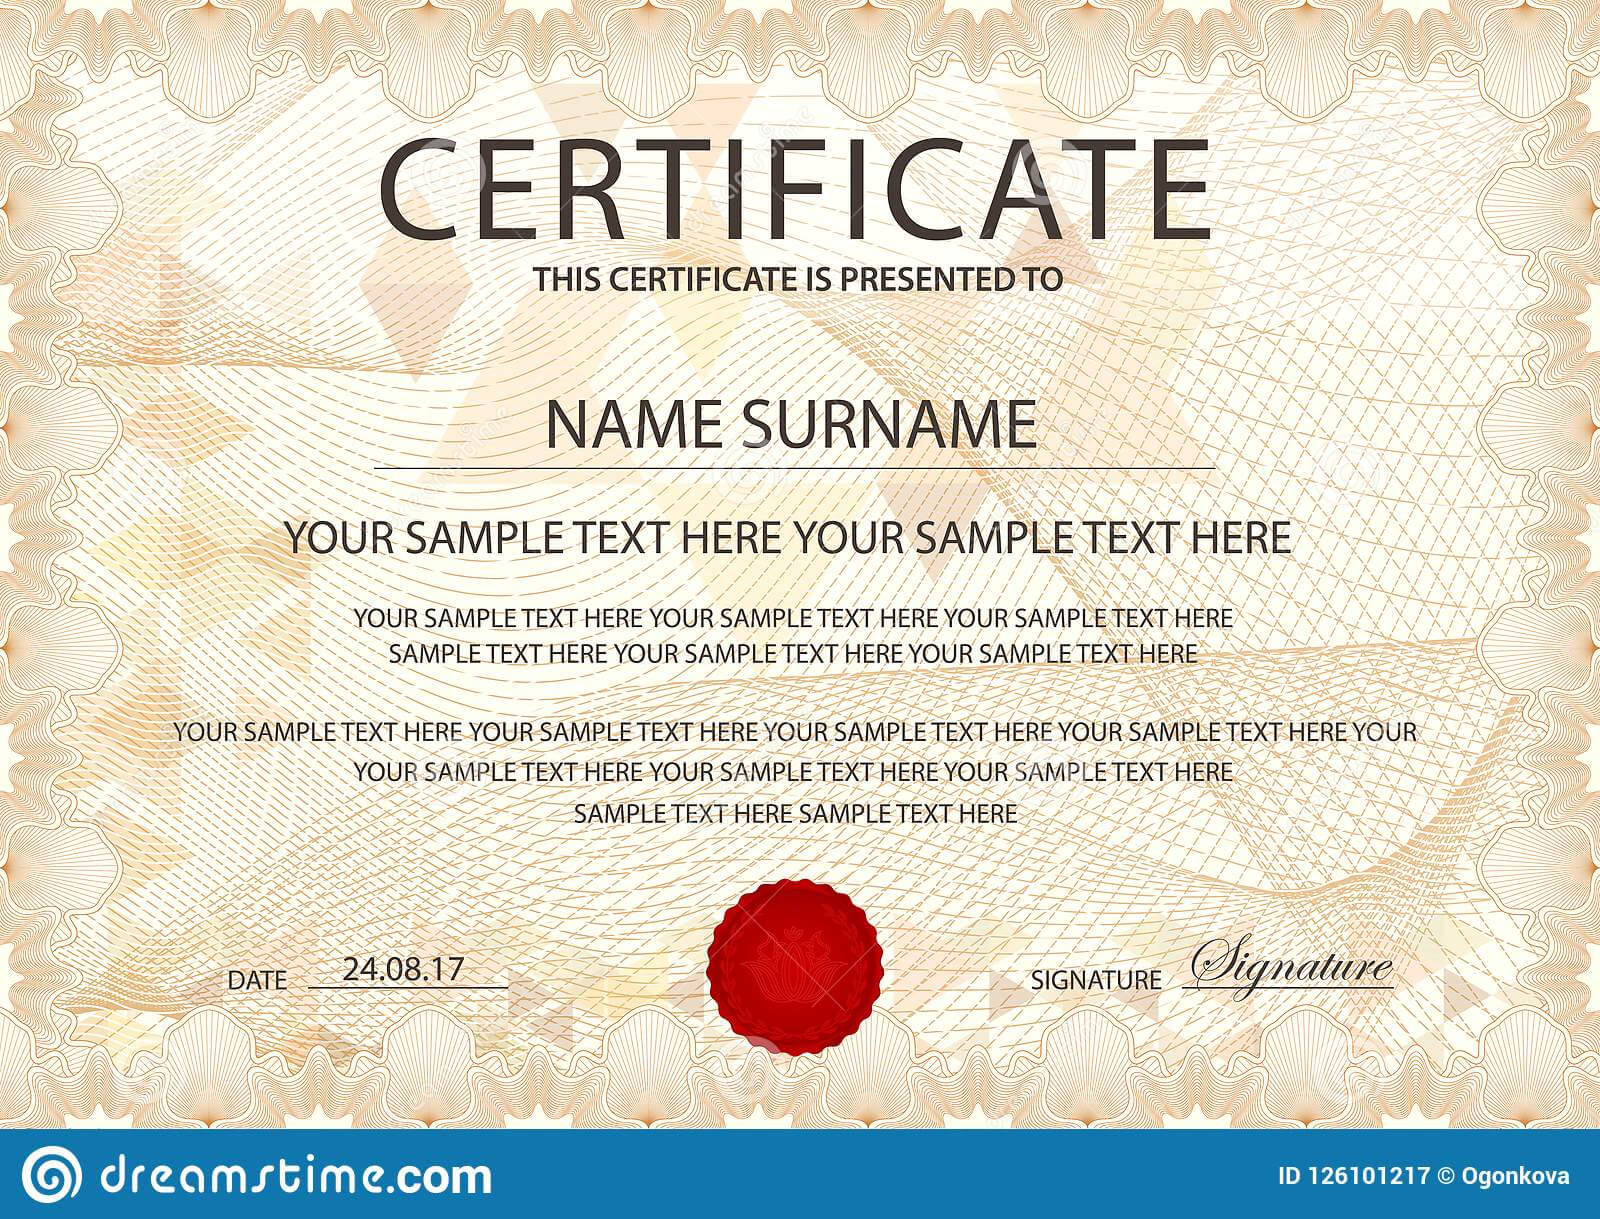 Certificate Template With Guilloche Pattern, Frame Border In First Place Certificate Template